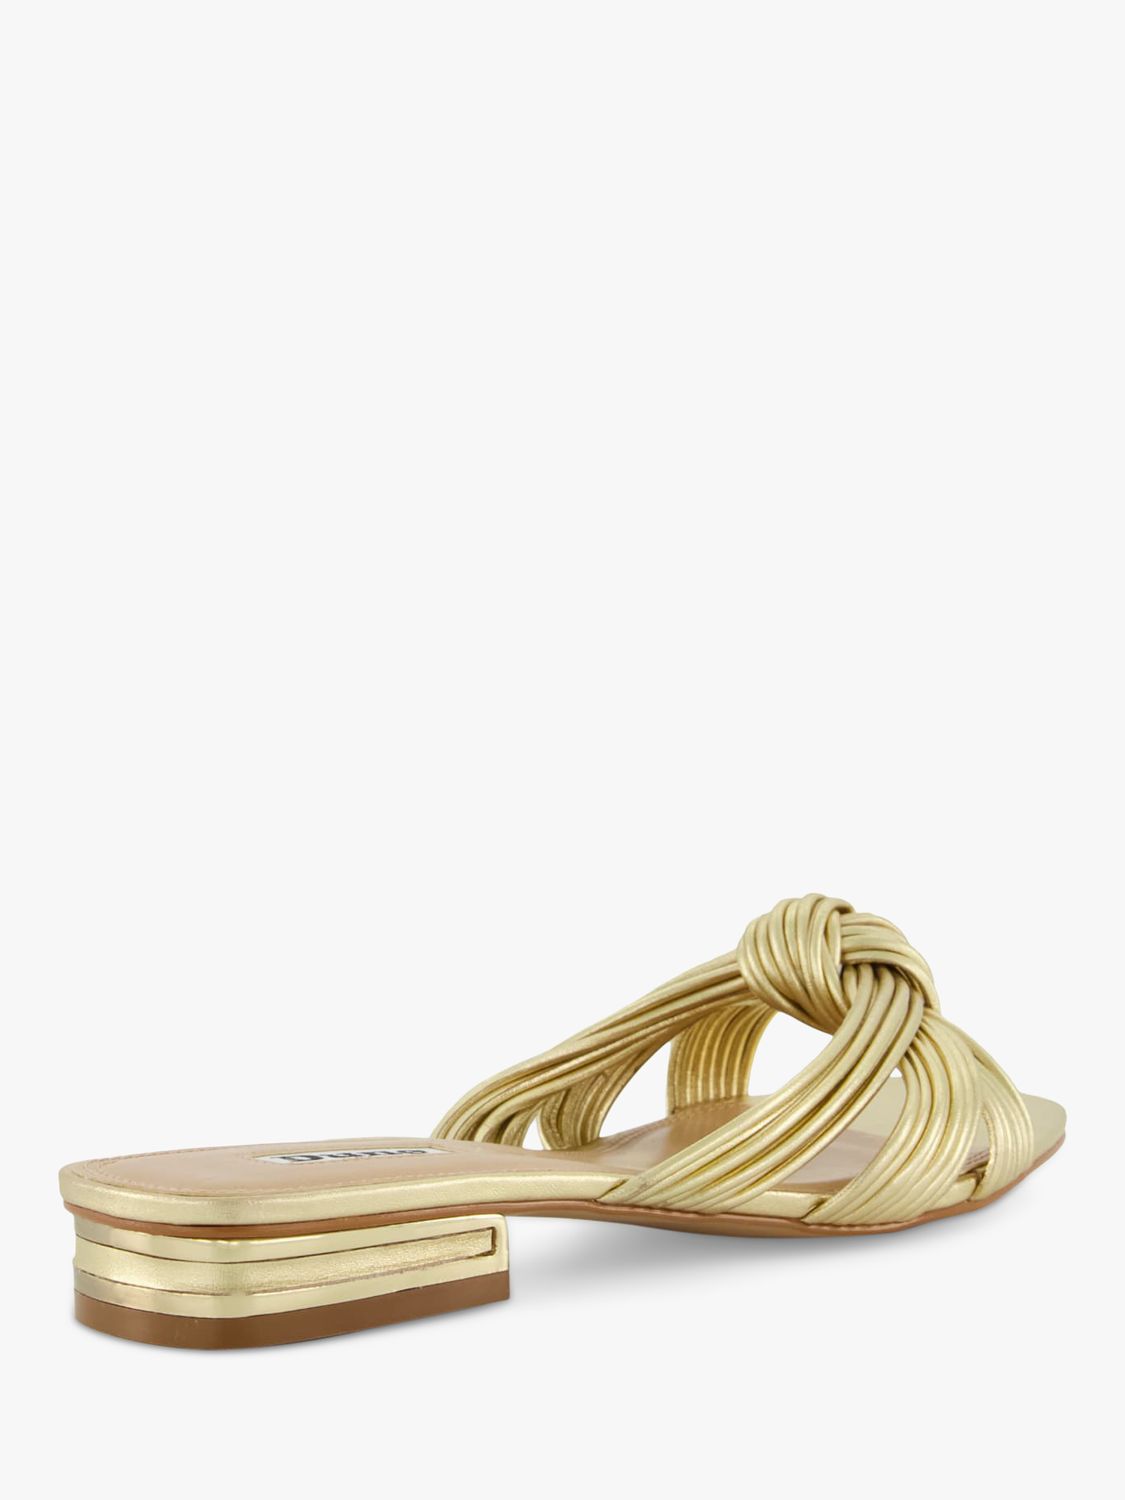 Dune Leyla Leather Knotted Strap Sandals, Gold at John Lewis & Partners